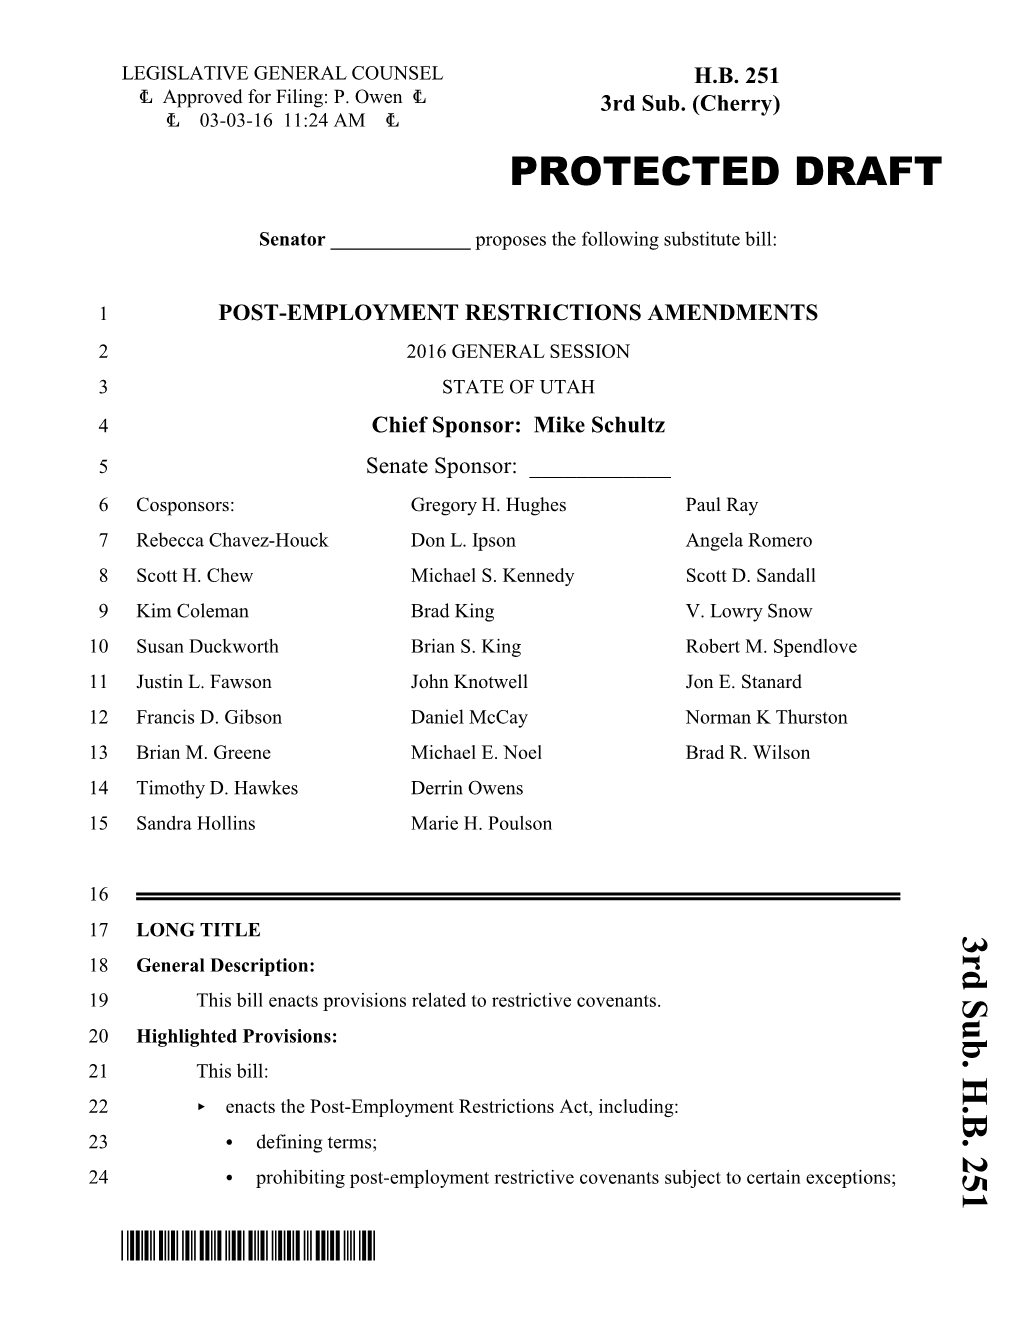 Protected Draft *Hb0251s03*